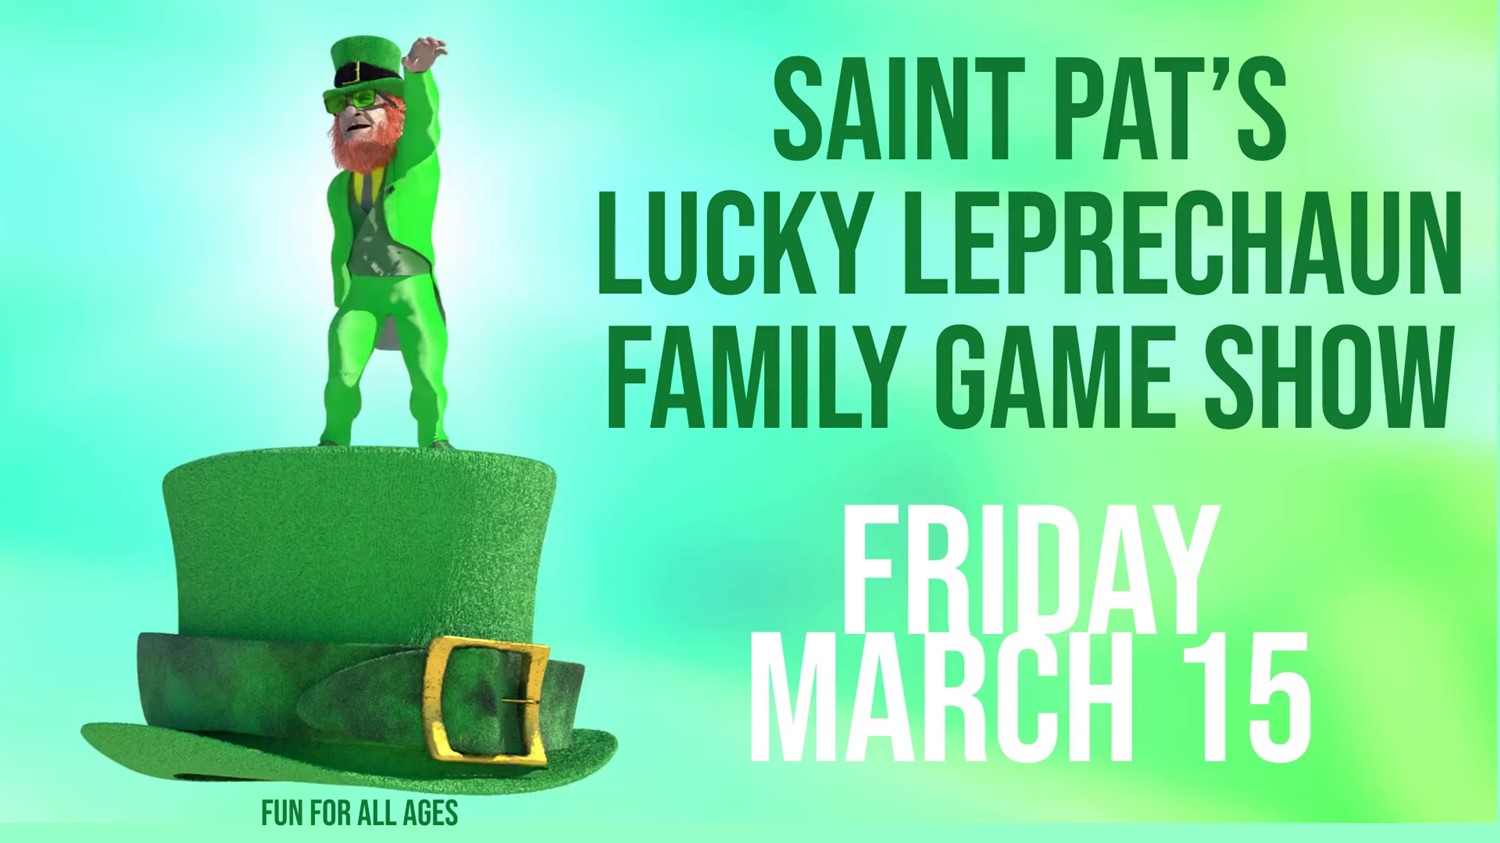 LUCKY LEPRECHAUN Family Game Show  on Mar 15, 19:00@FFX Theatre - Buy tickets and Get information on Family Fun Xperience tickets.ffxshow.org